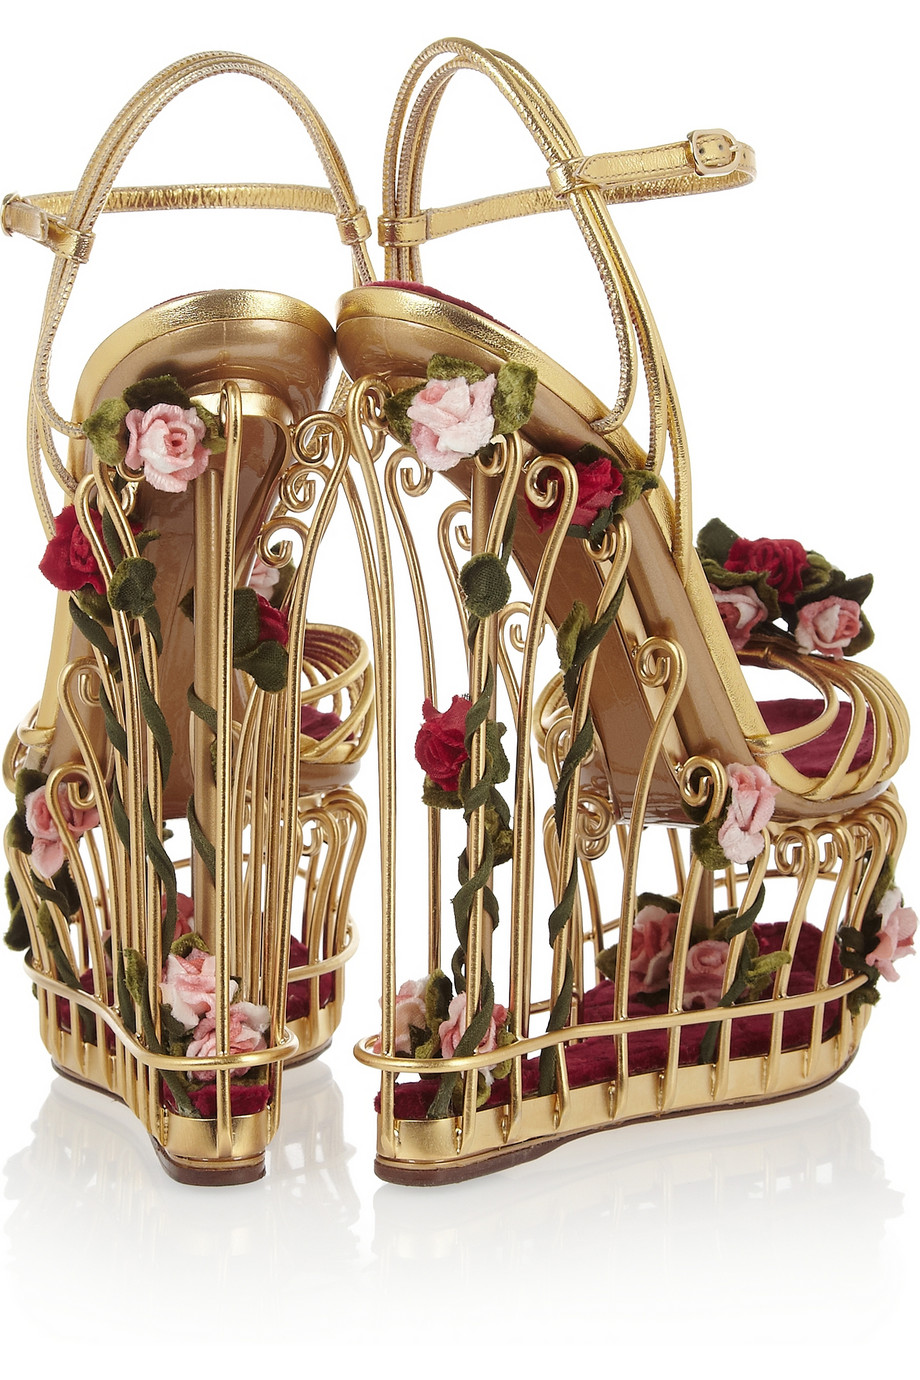 dolce and gabbana beauty and the beast shoes price